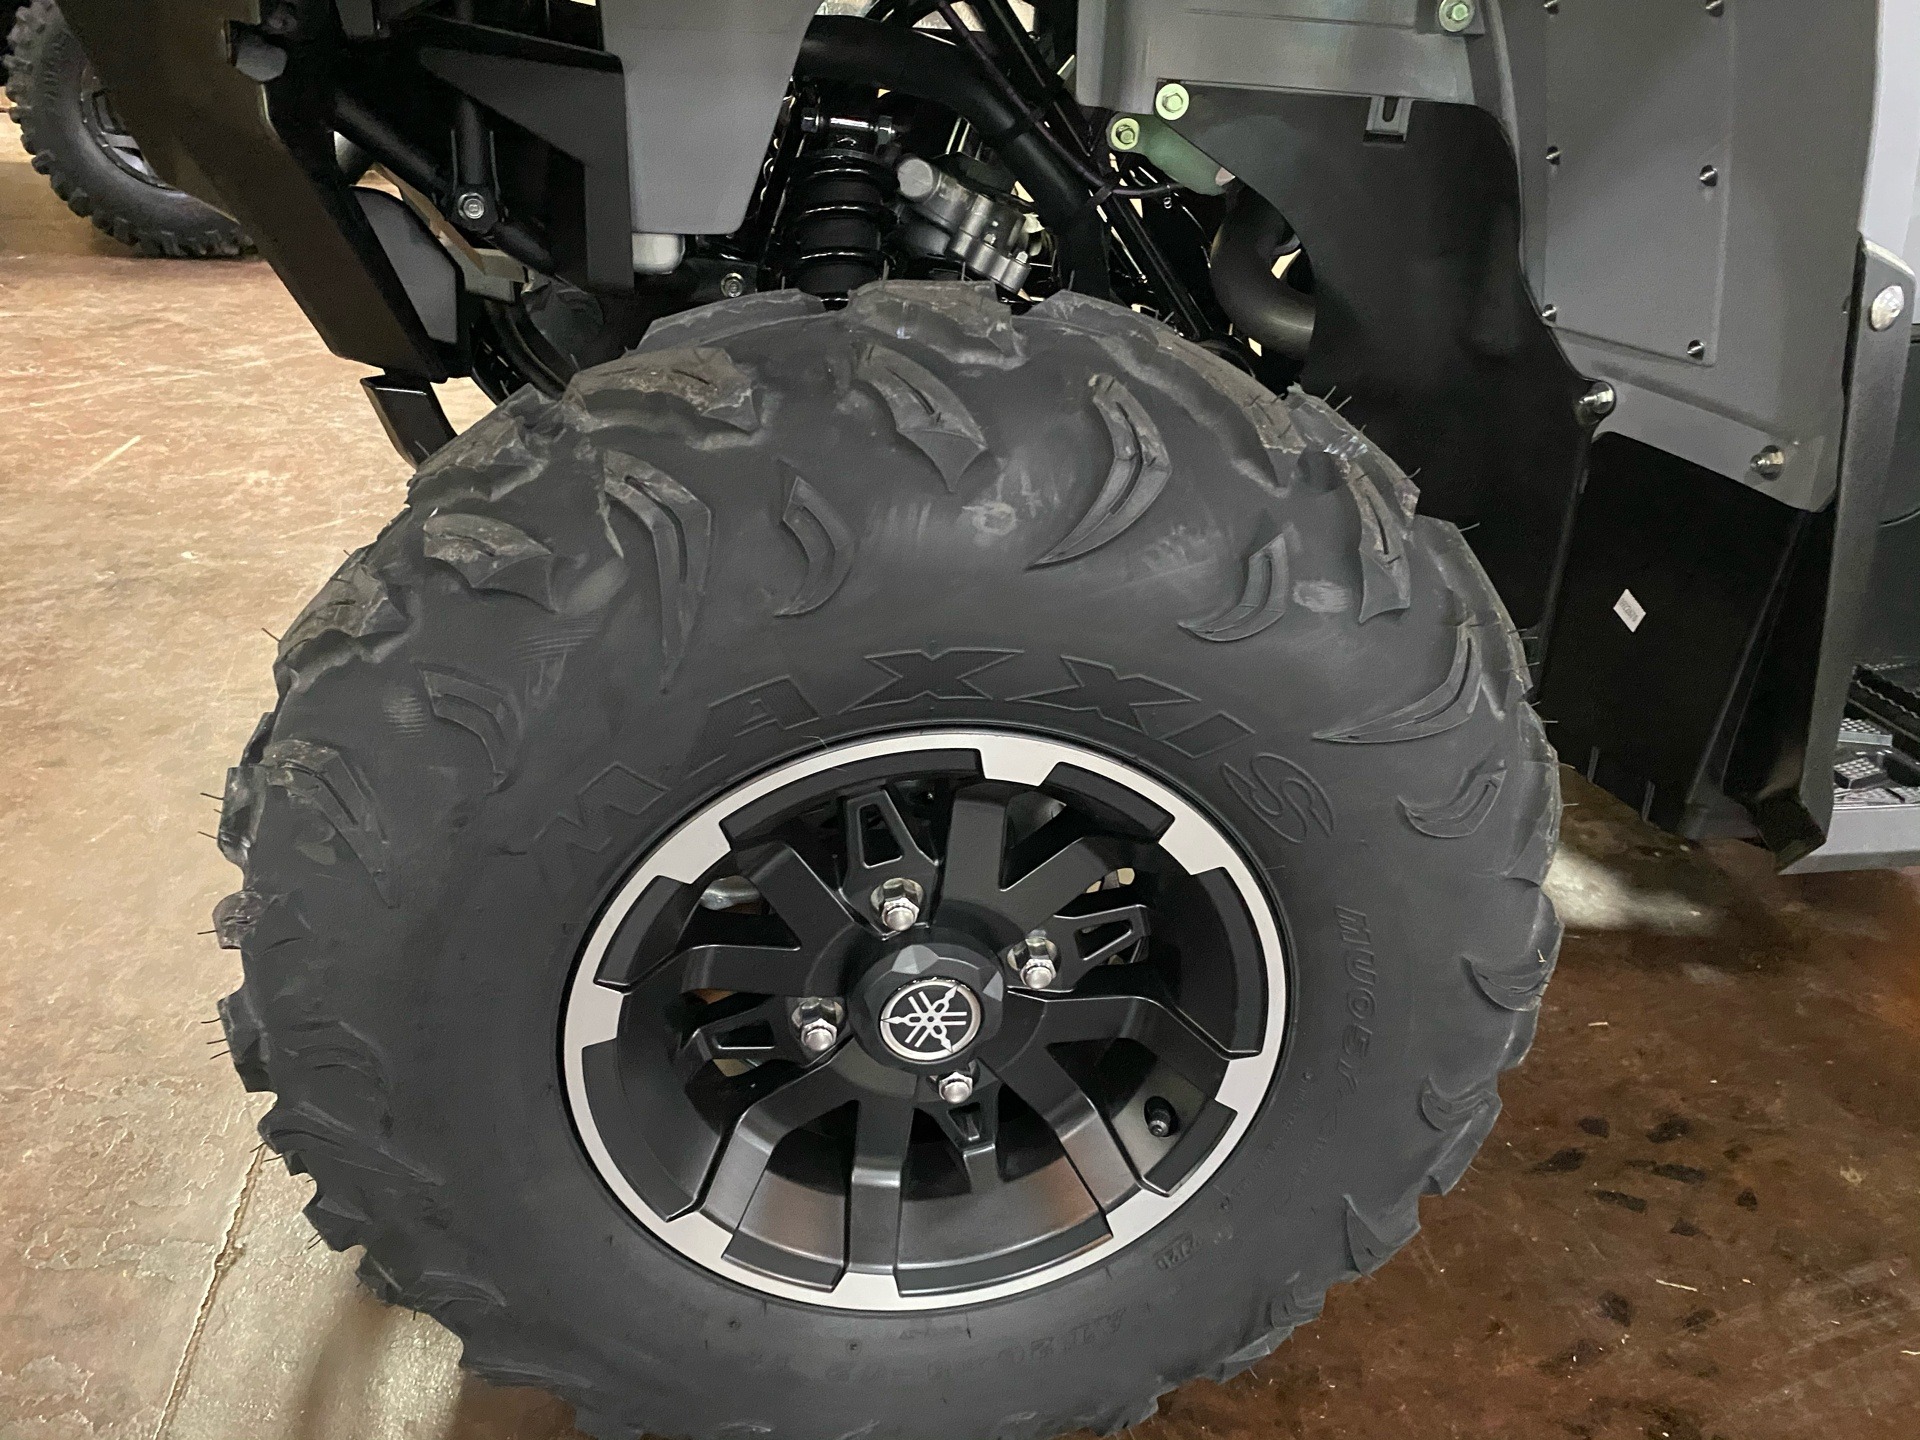 New 2021 Yamaha Grizzly EPS ATVs in Statesville, NC | Stock Number: 103123 greatwesternmotorcycles.com